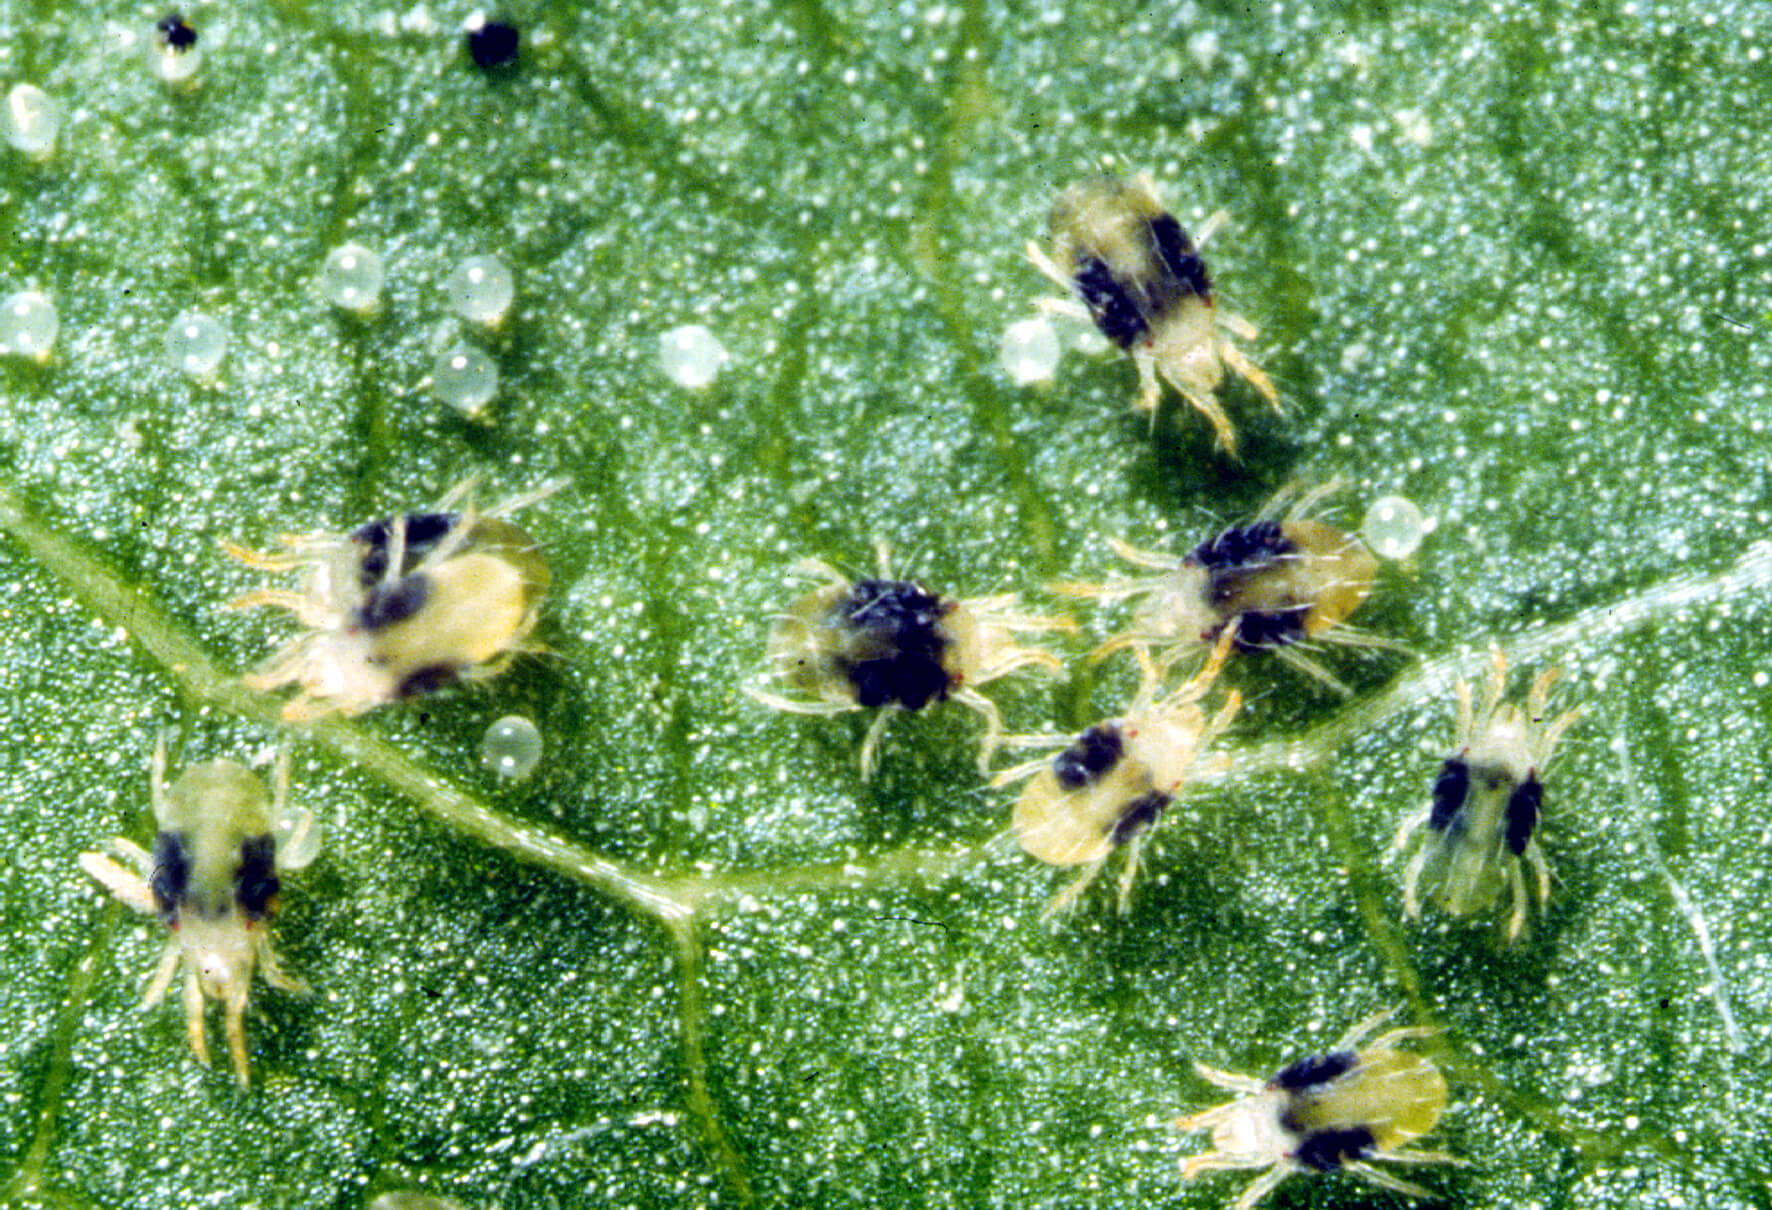 Adult Spider Mites and Eggs